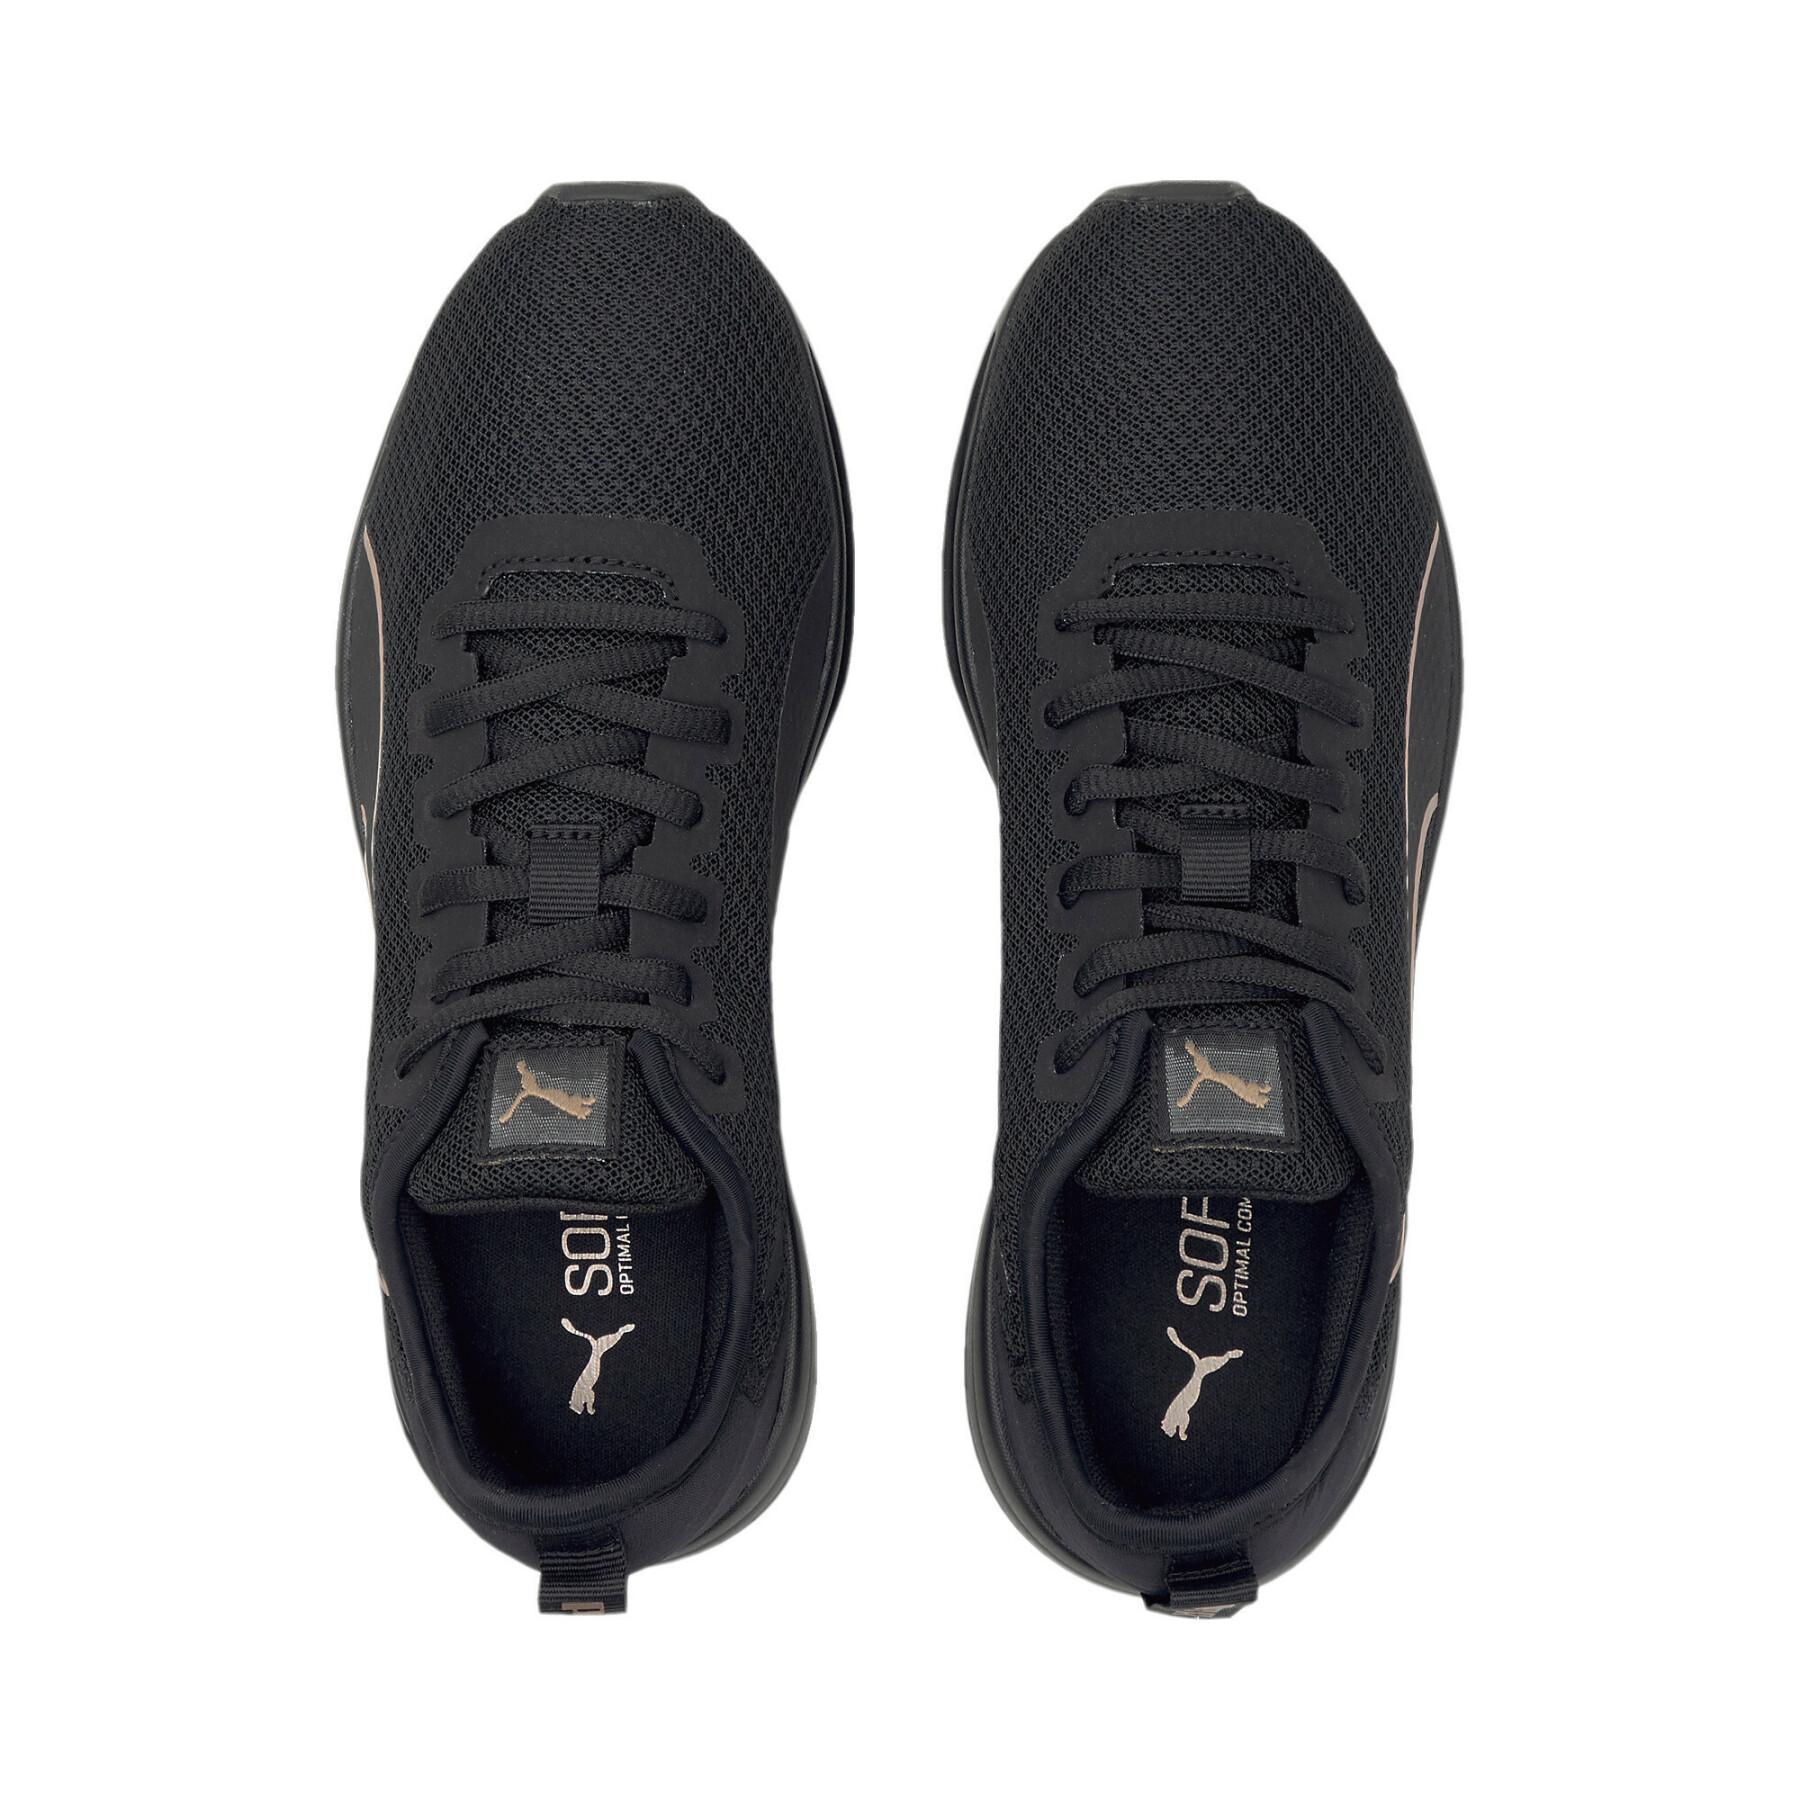 Shoes Puma Accent - Shoes Running - Running - Physical maintenance